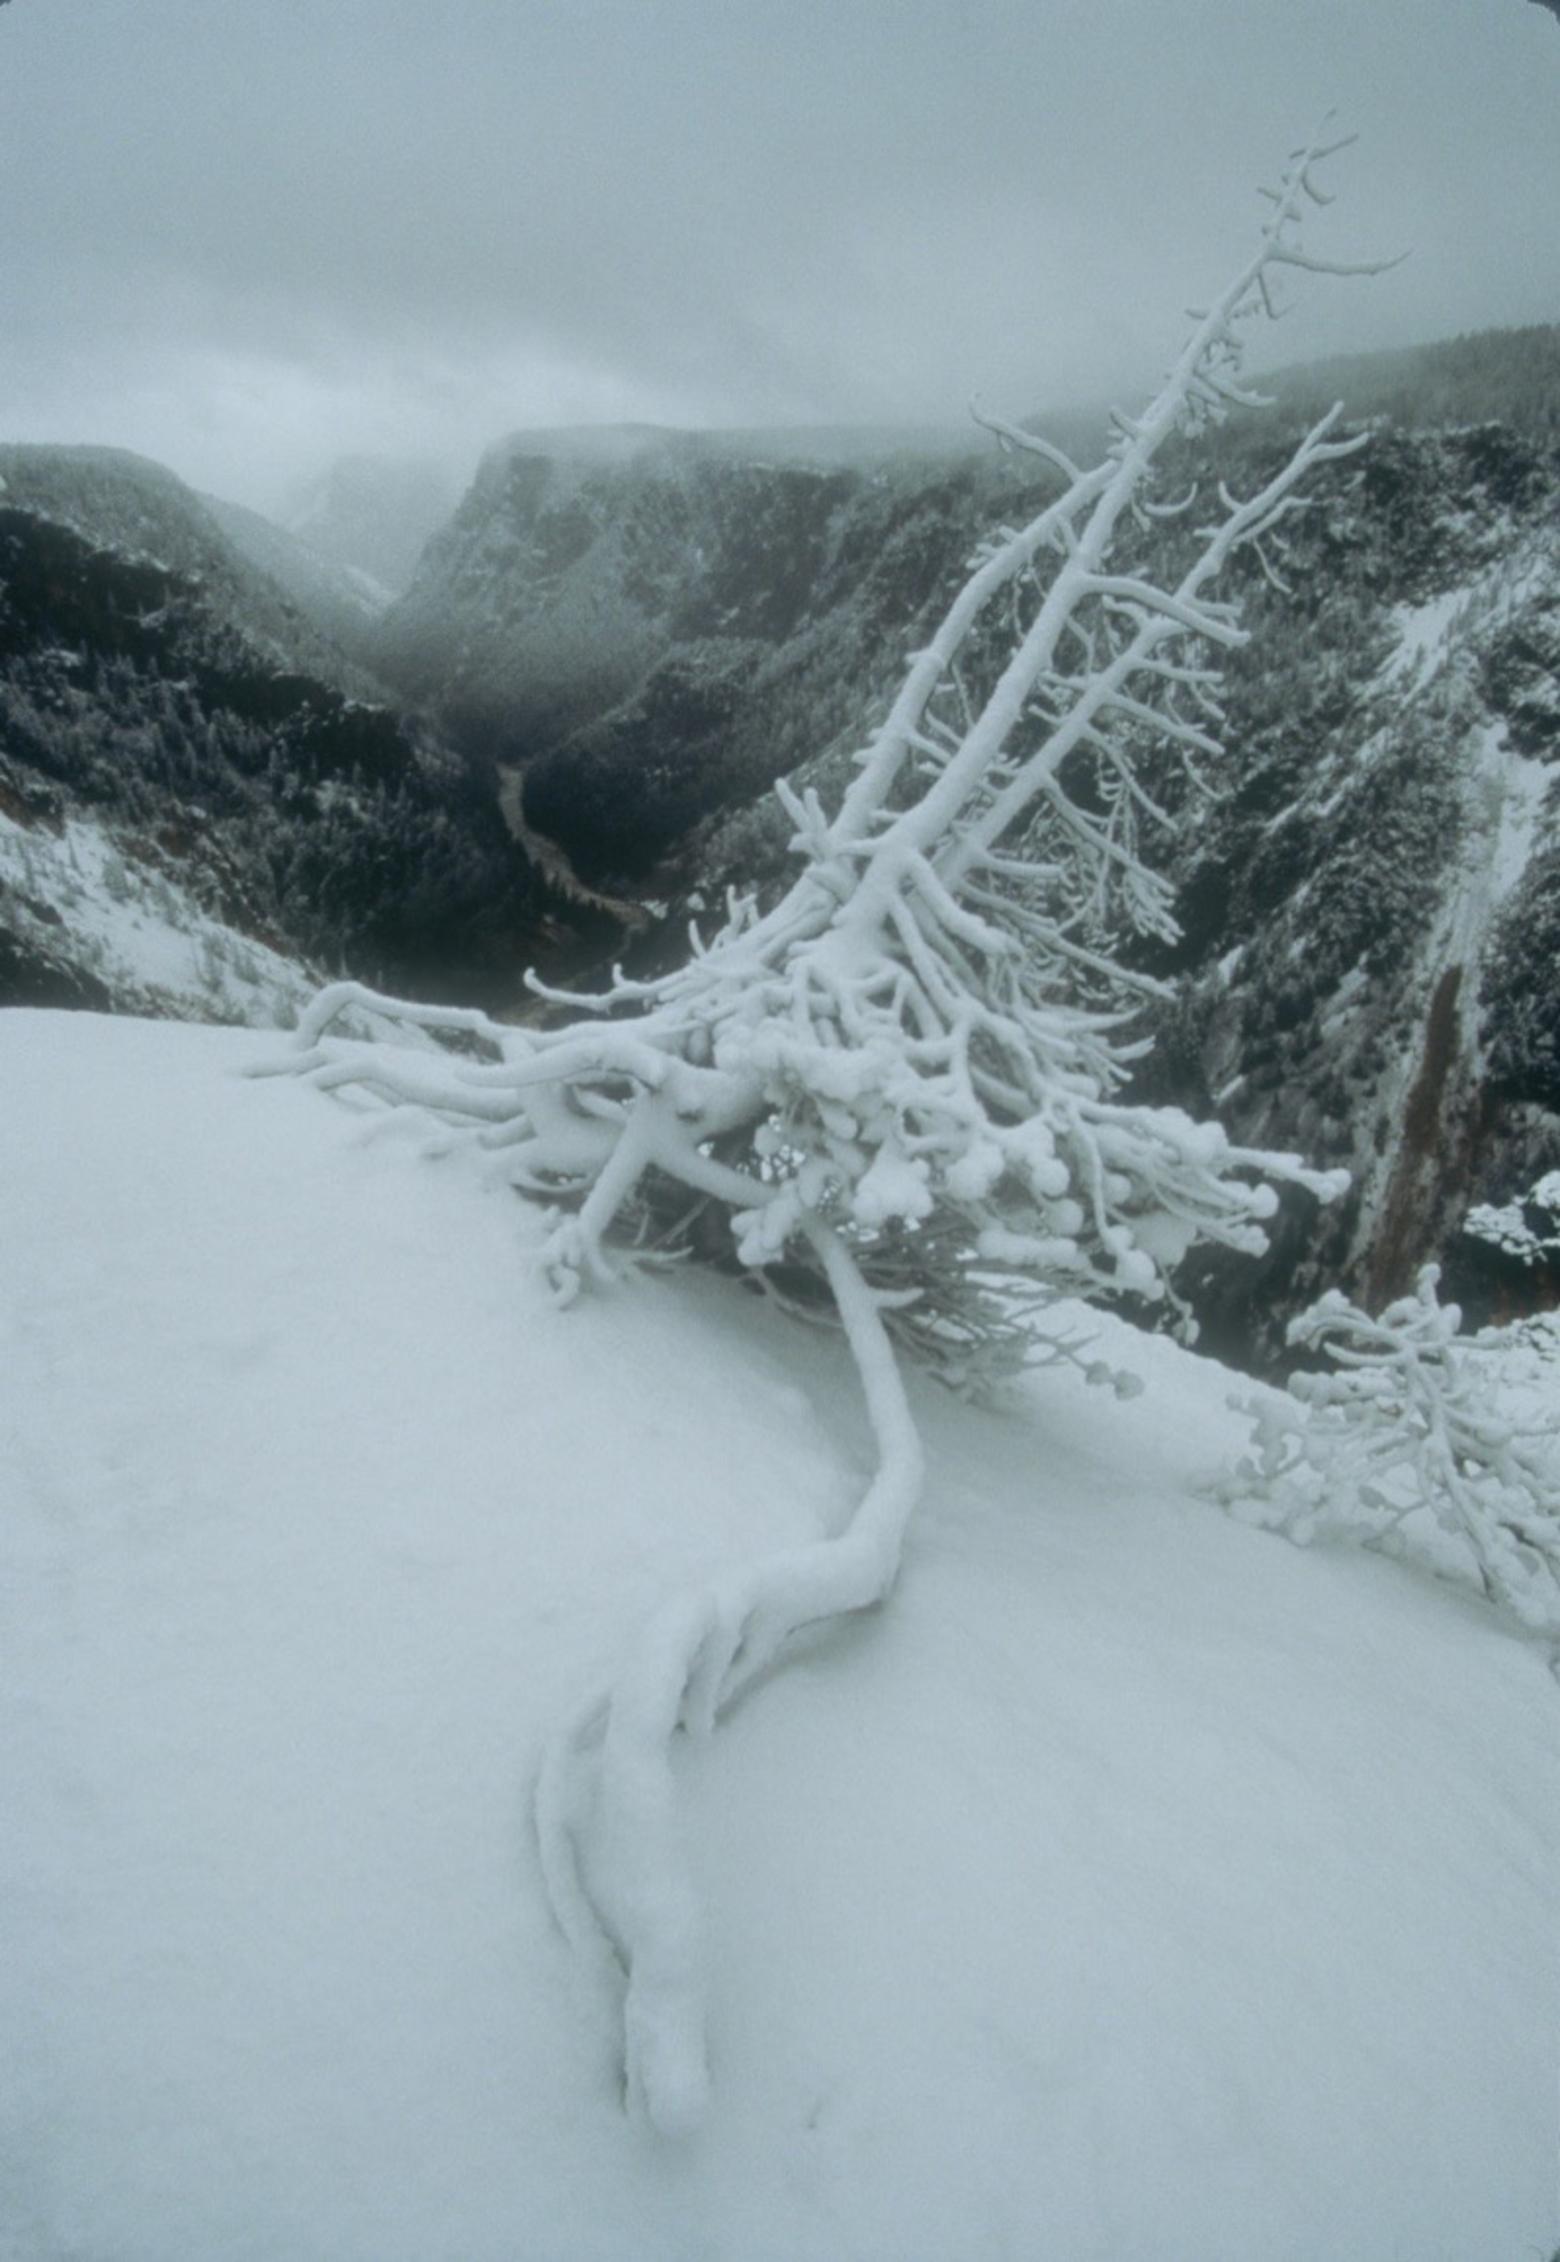 &quot;A winter snowstorm embellishes this old pine snag that has extended a formidable root in an attempt to belay the itself from being drawn into the maw of the canyon,&quot; Fuller notes. &quot;Think of clawing your fingernails in slow motion into the top edge of a cliff with a 1,200-foot exposure. Eventually the pull of gravity over-whelmes the life force in all of us.&quot; Photo by Steven Fuller